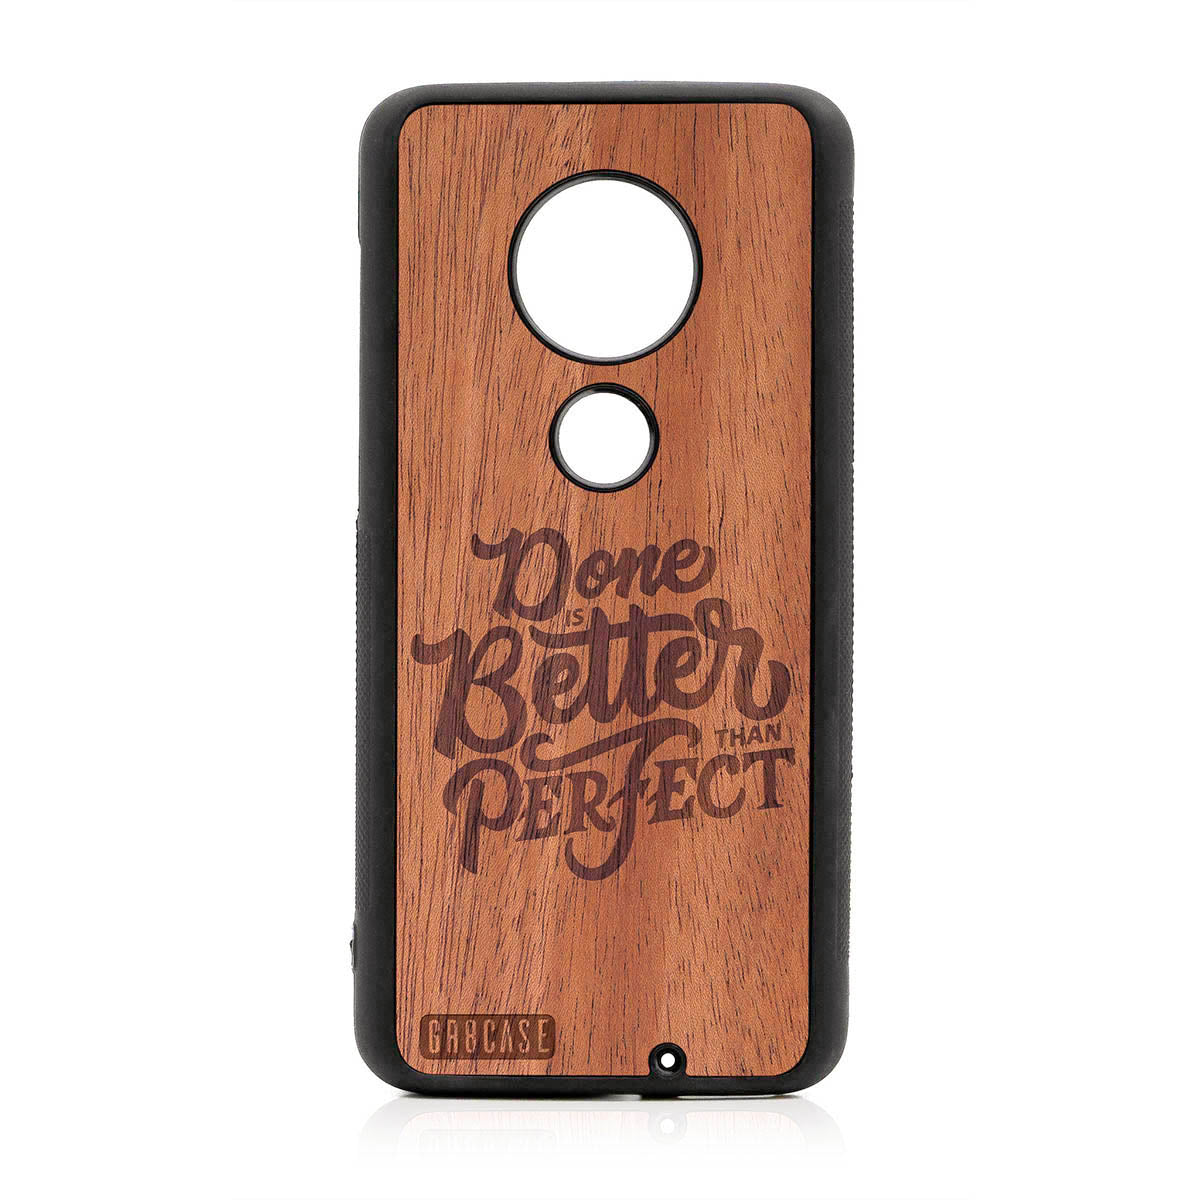 Done Is Better Than Perfect Design Wood Case For Moto G7 Plus by GR8CASE